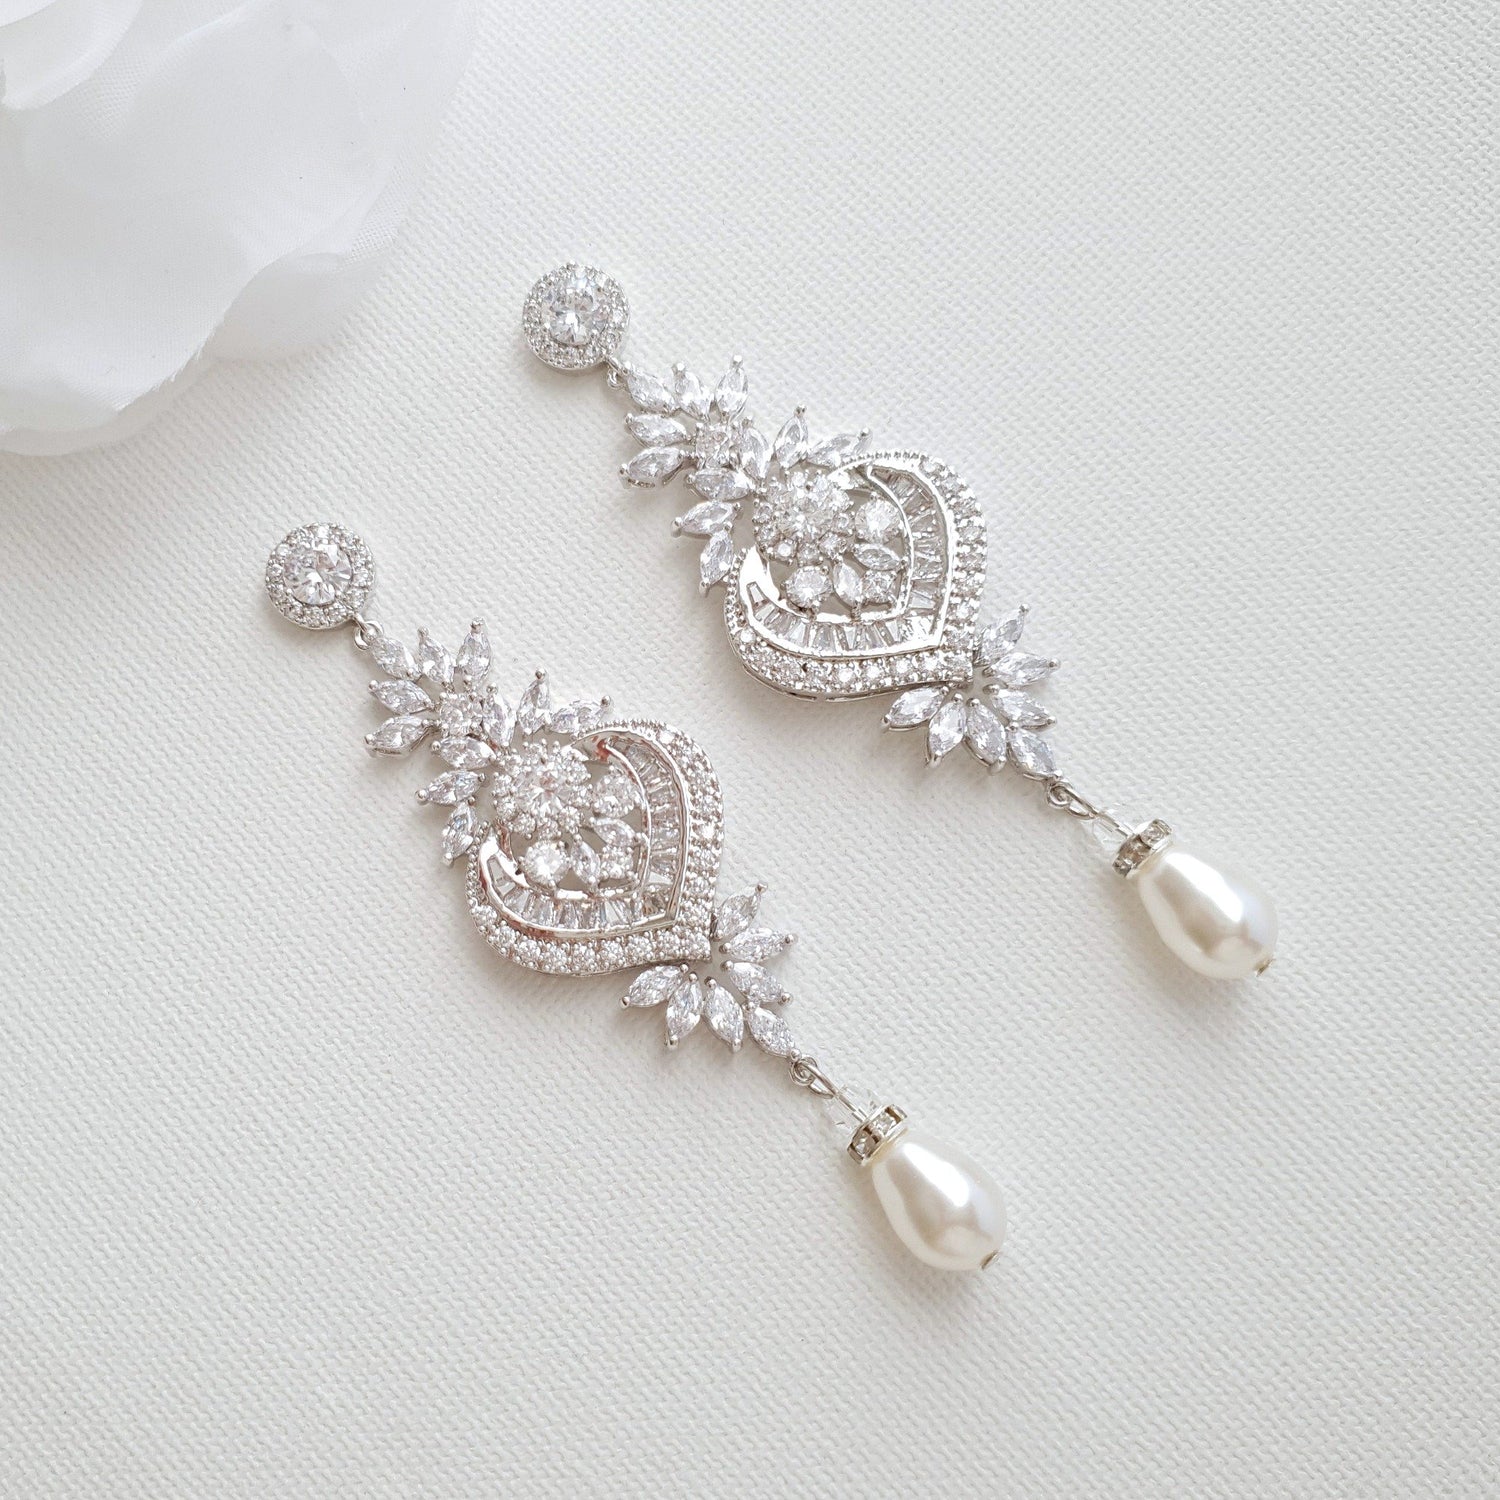 Chandelier Wedding Earrings in silver and Cubic zirconia and Swarovski Pearl Drops- Poetry Designs